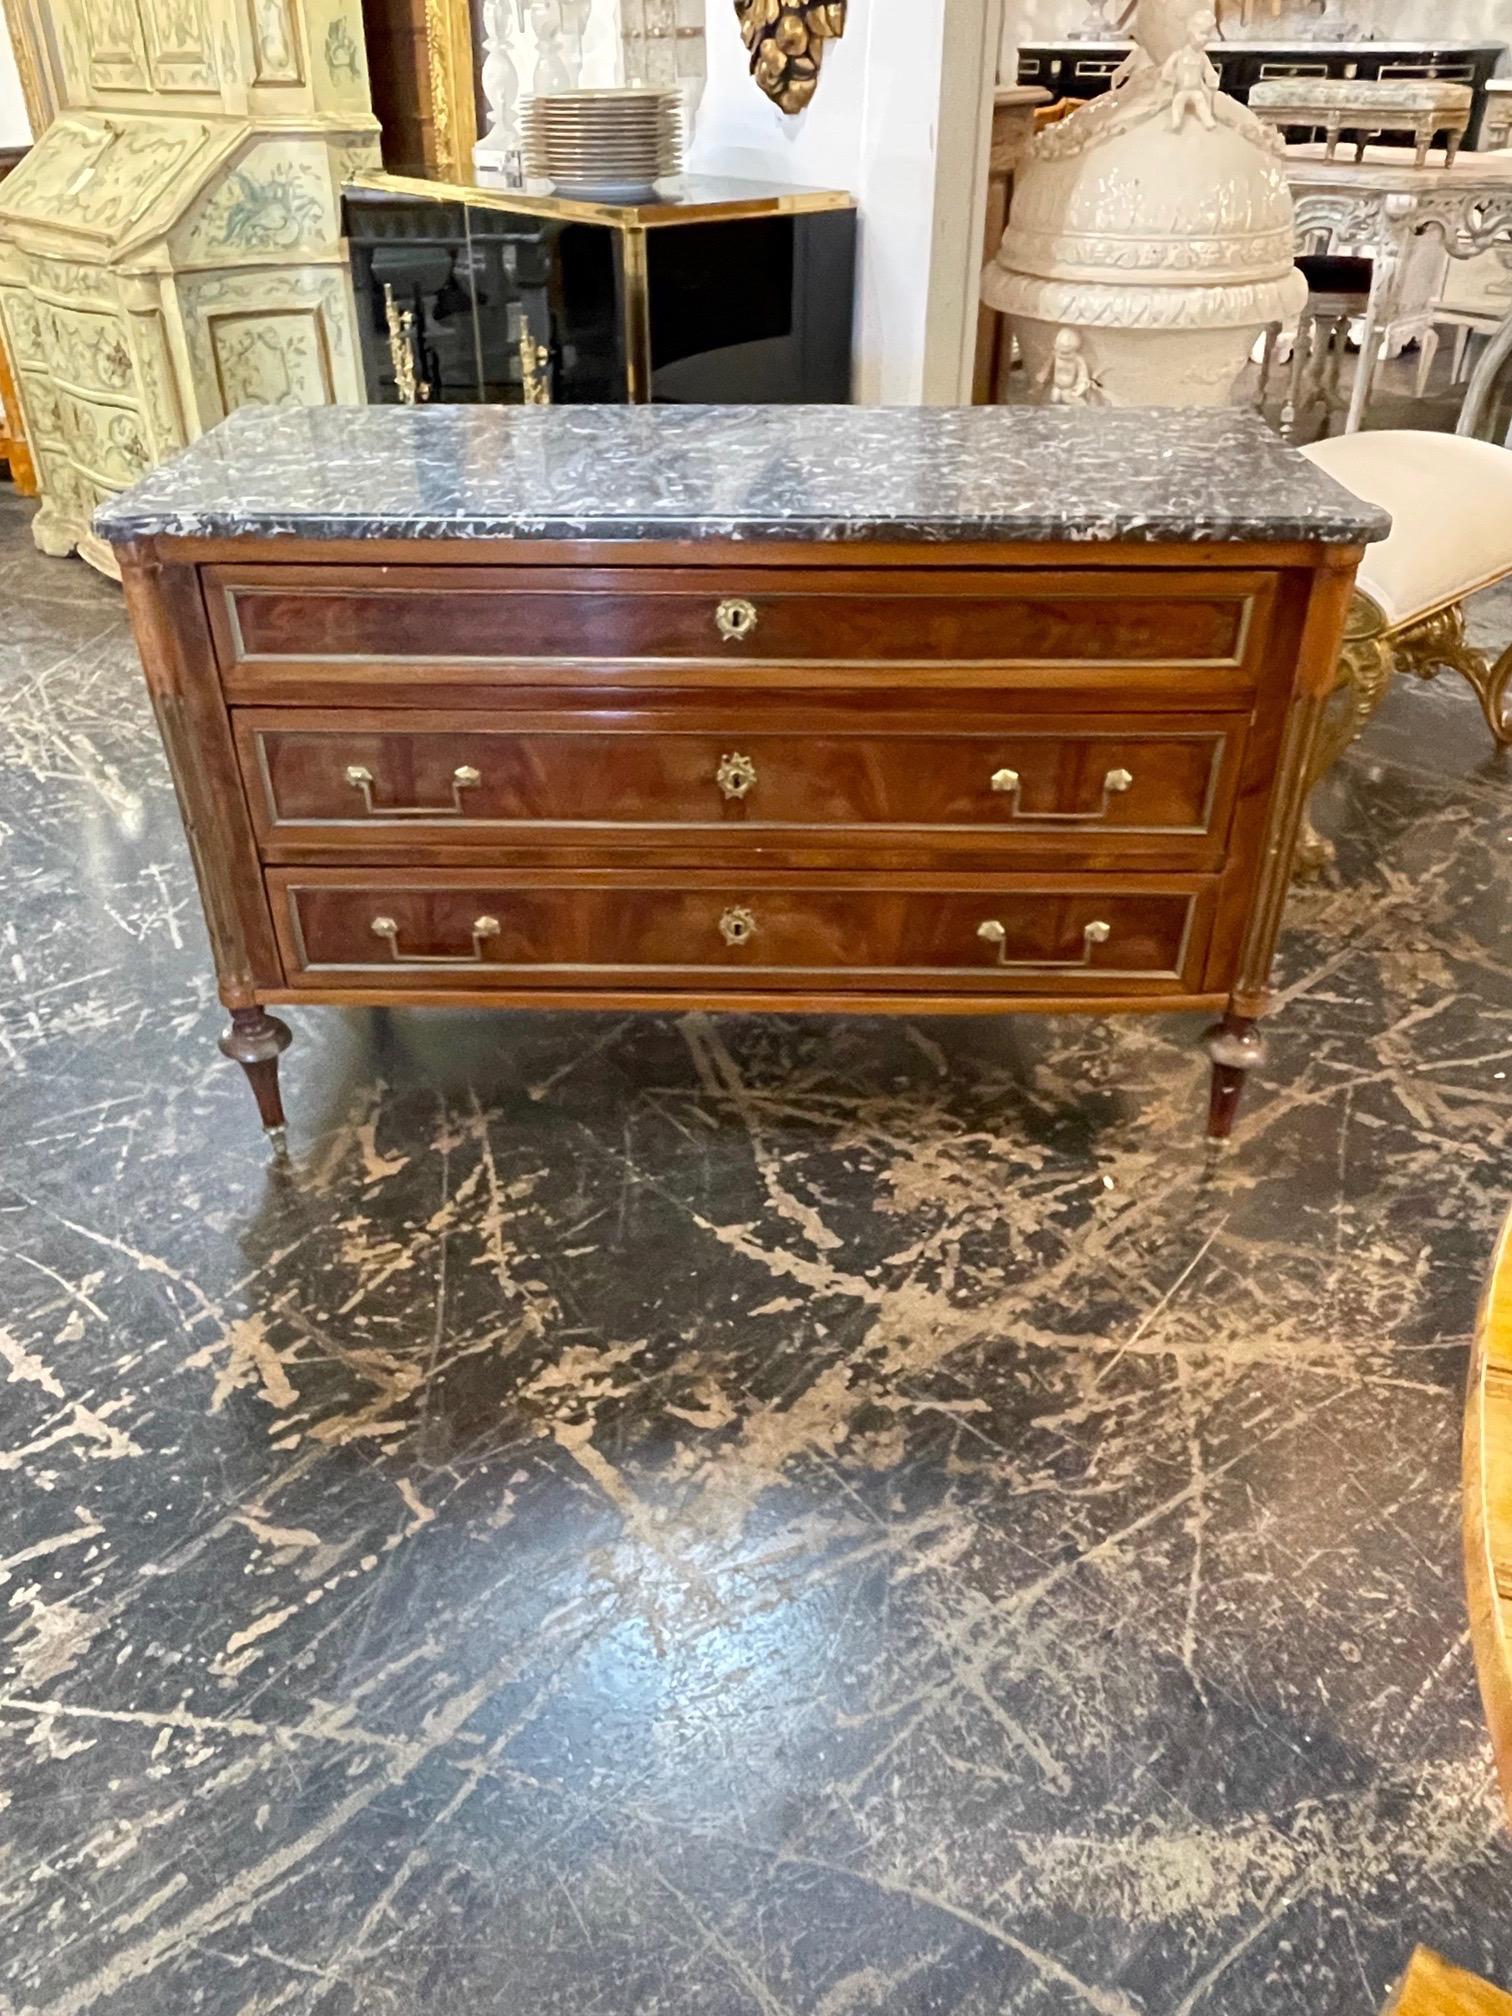 Elegant 19th century French Directoire Mahogany commode with brass trim and grey marble top. Beautiful clean lines. A classic piece. So pretty!